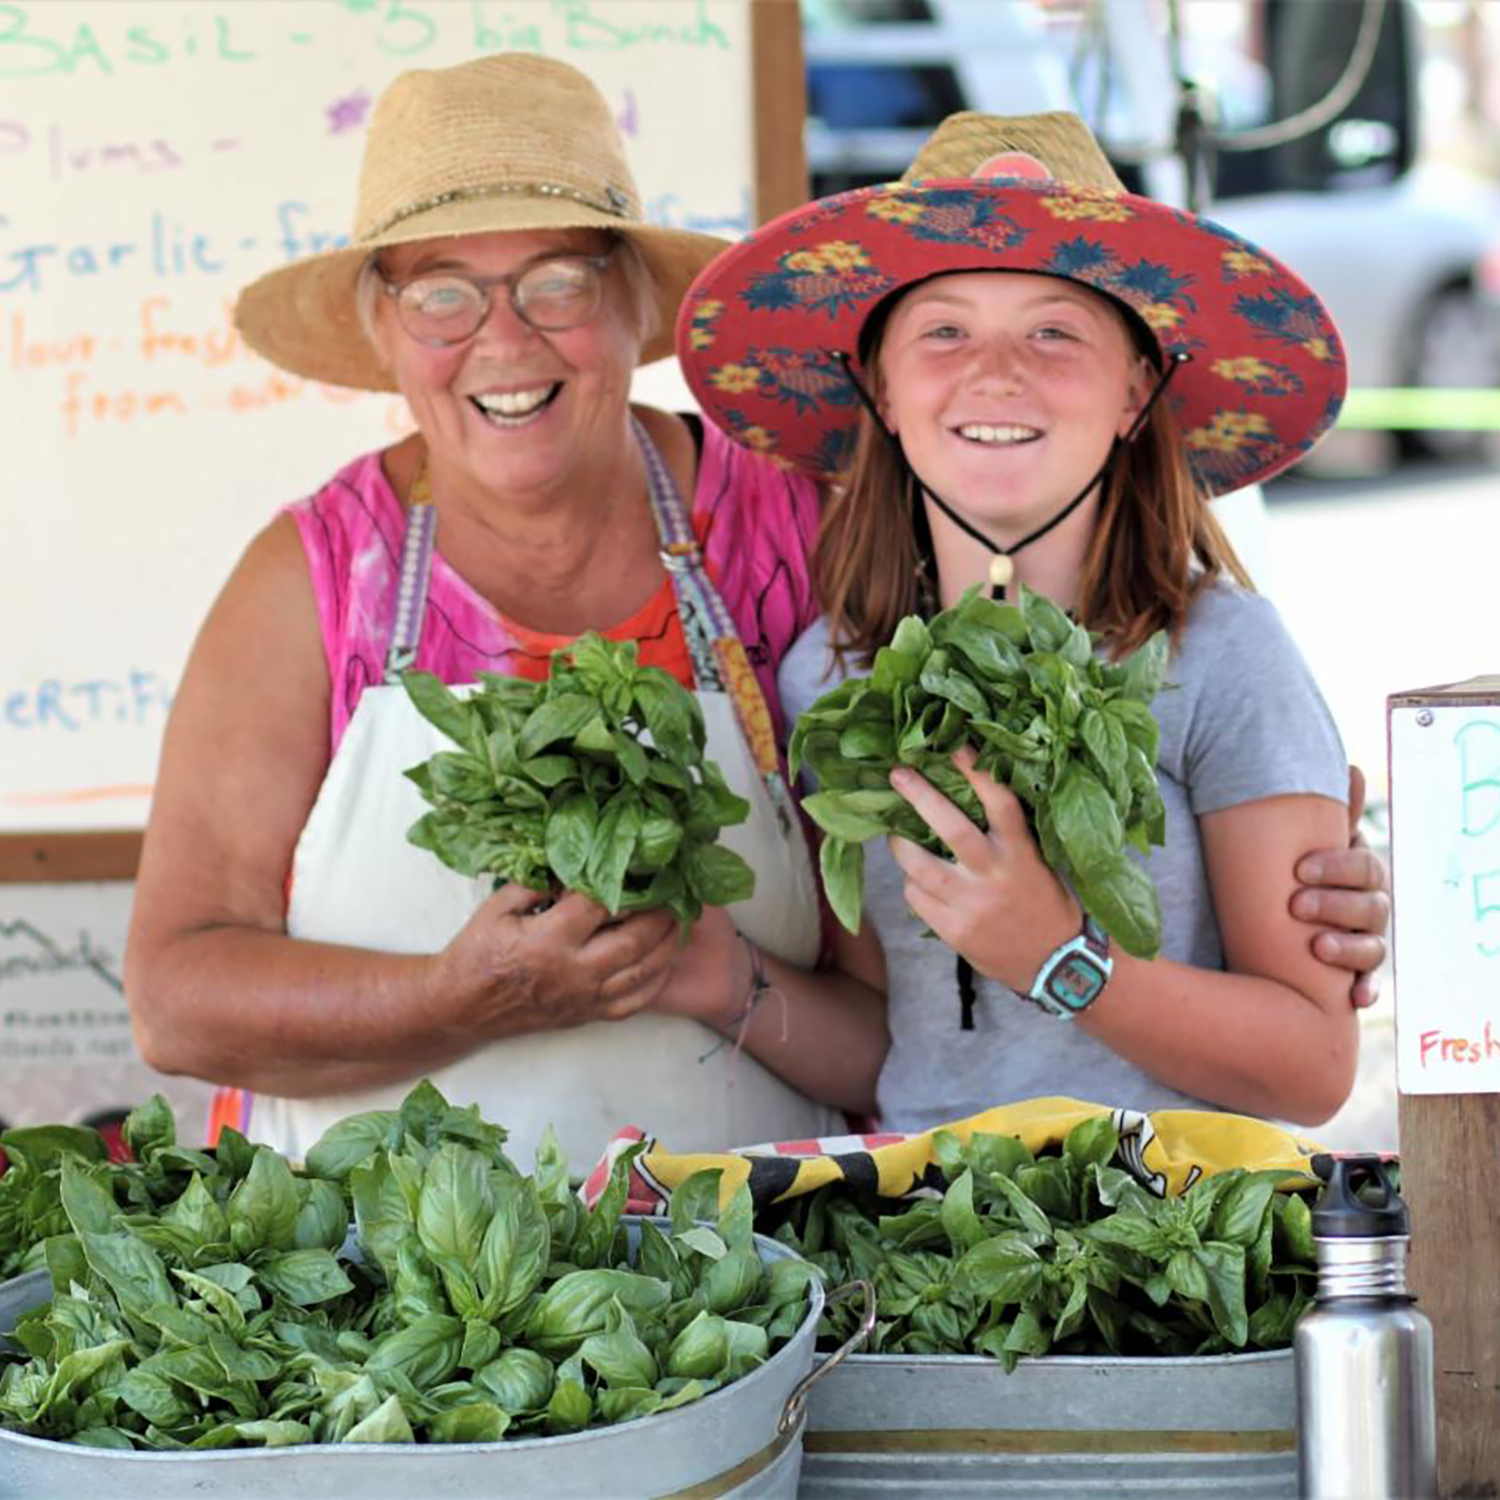 Two people in hats holding veggies at a farmer's market